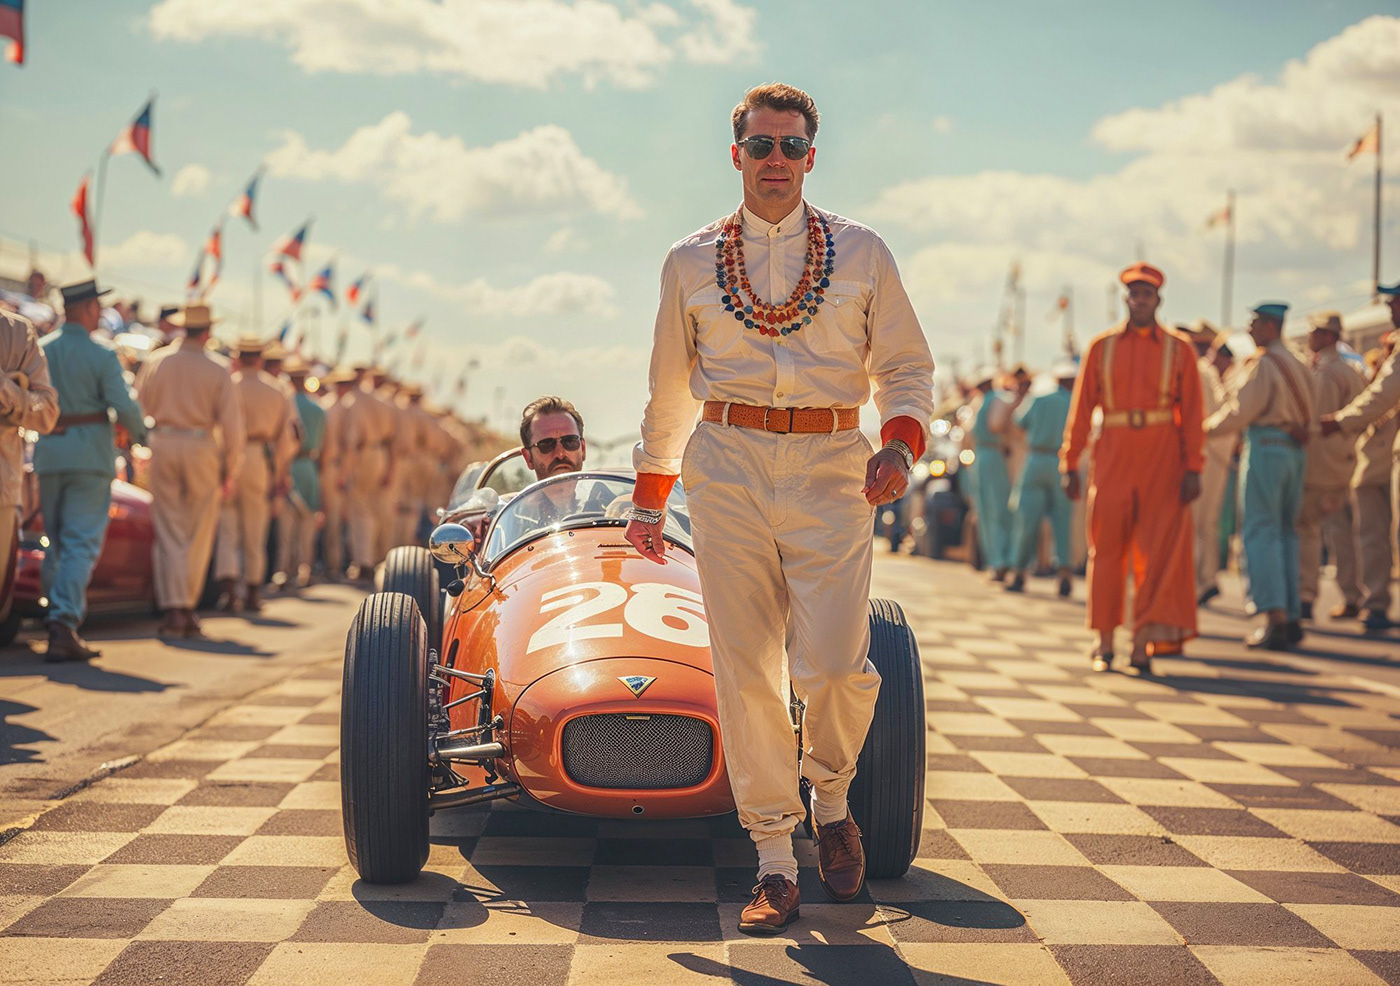 race Racing Motorsport Cars Classic movie wes anderson ai f1 racecars